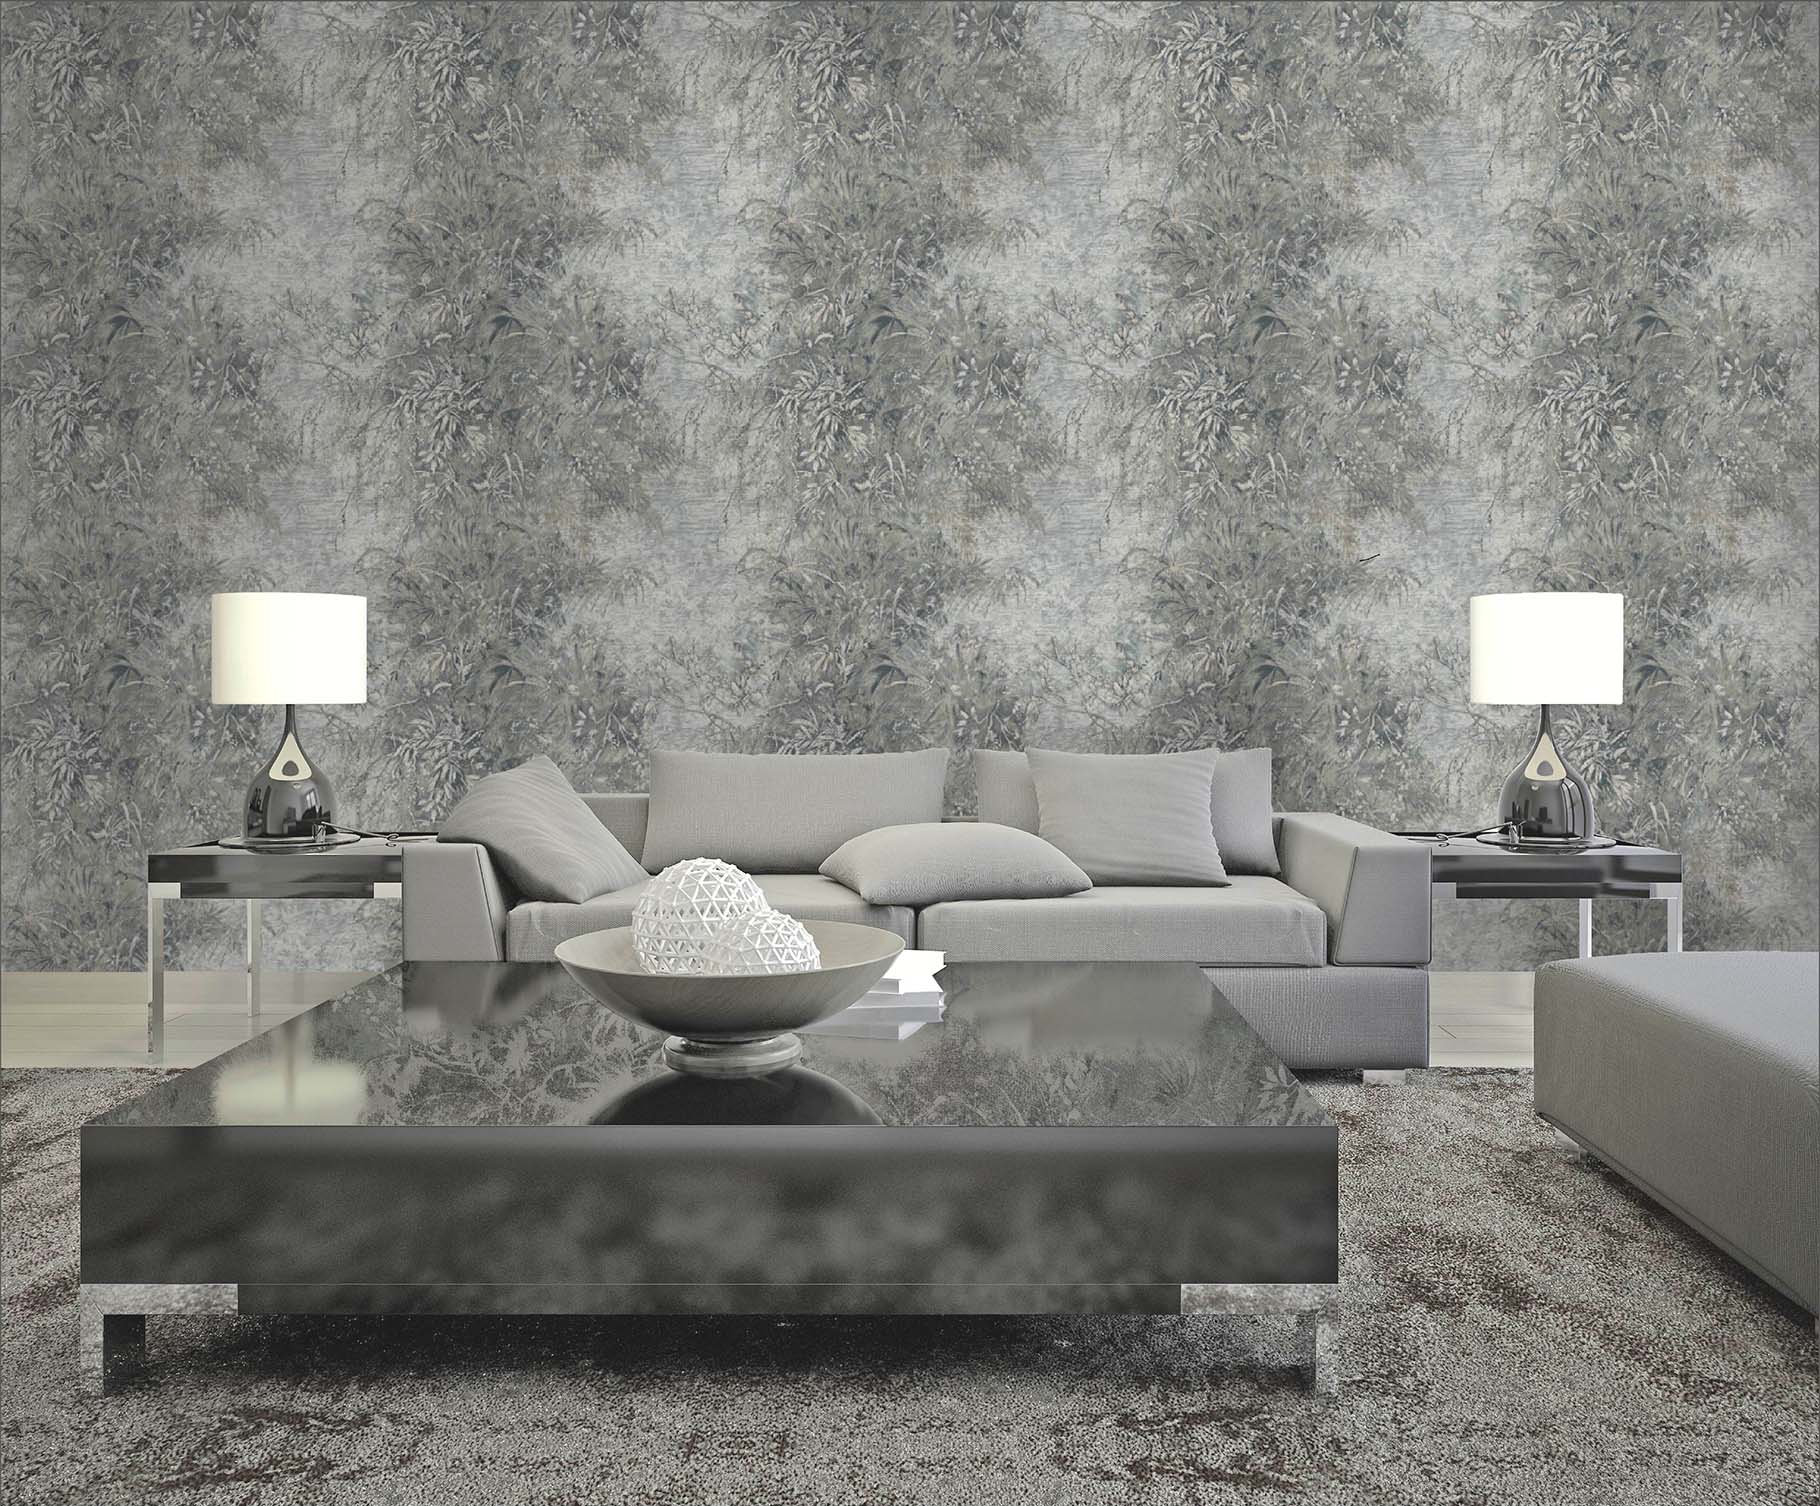 Soho by SketchTwenty3 delivers opulence and drama | Malcolm Fabrics NZ